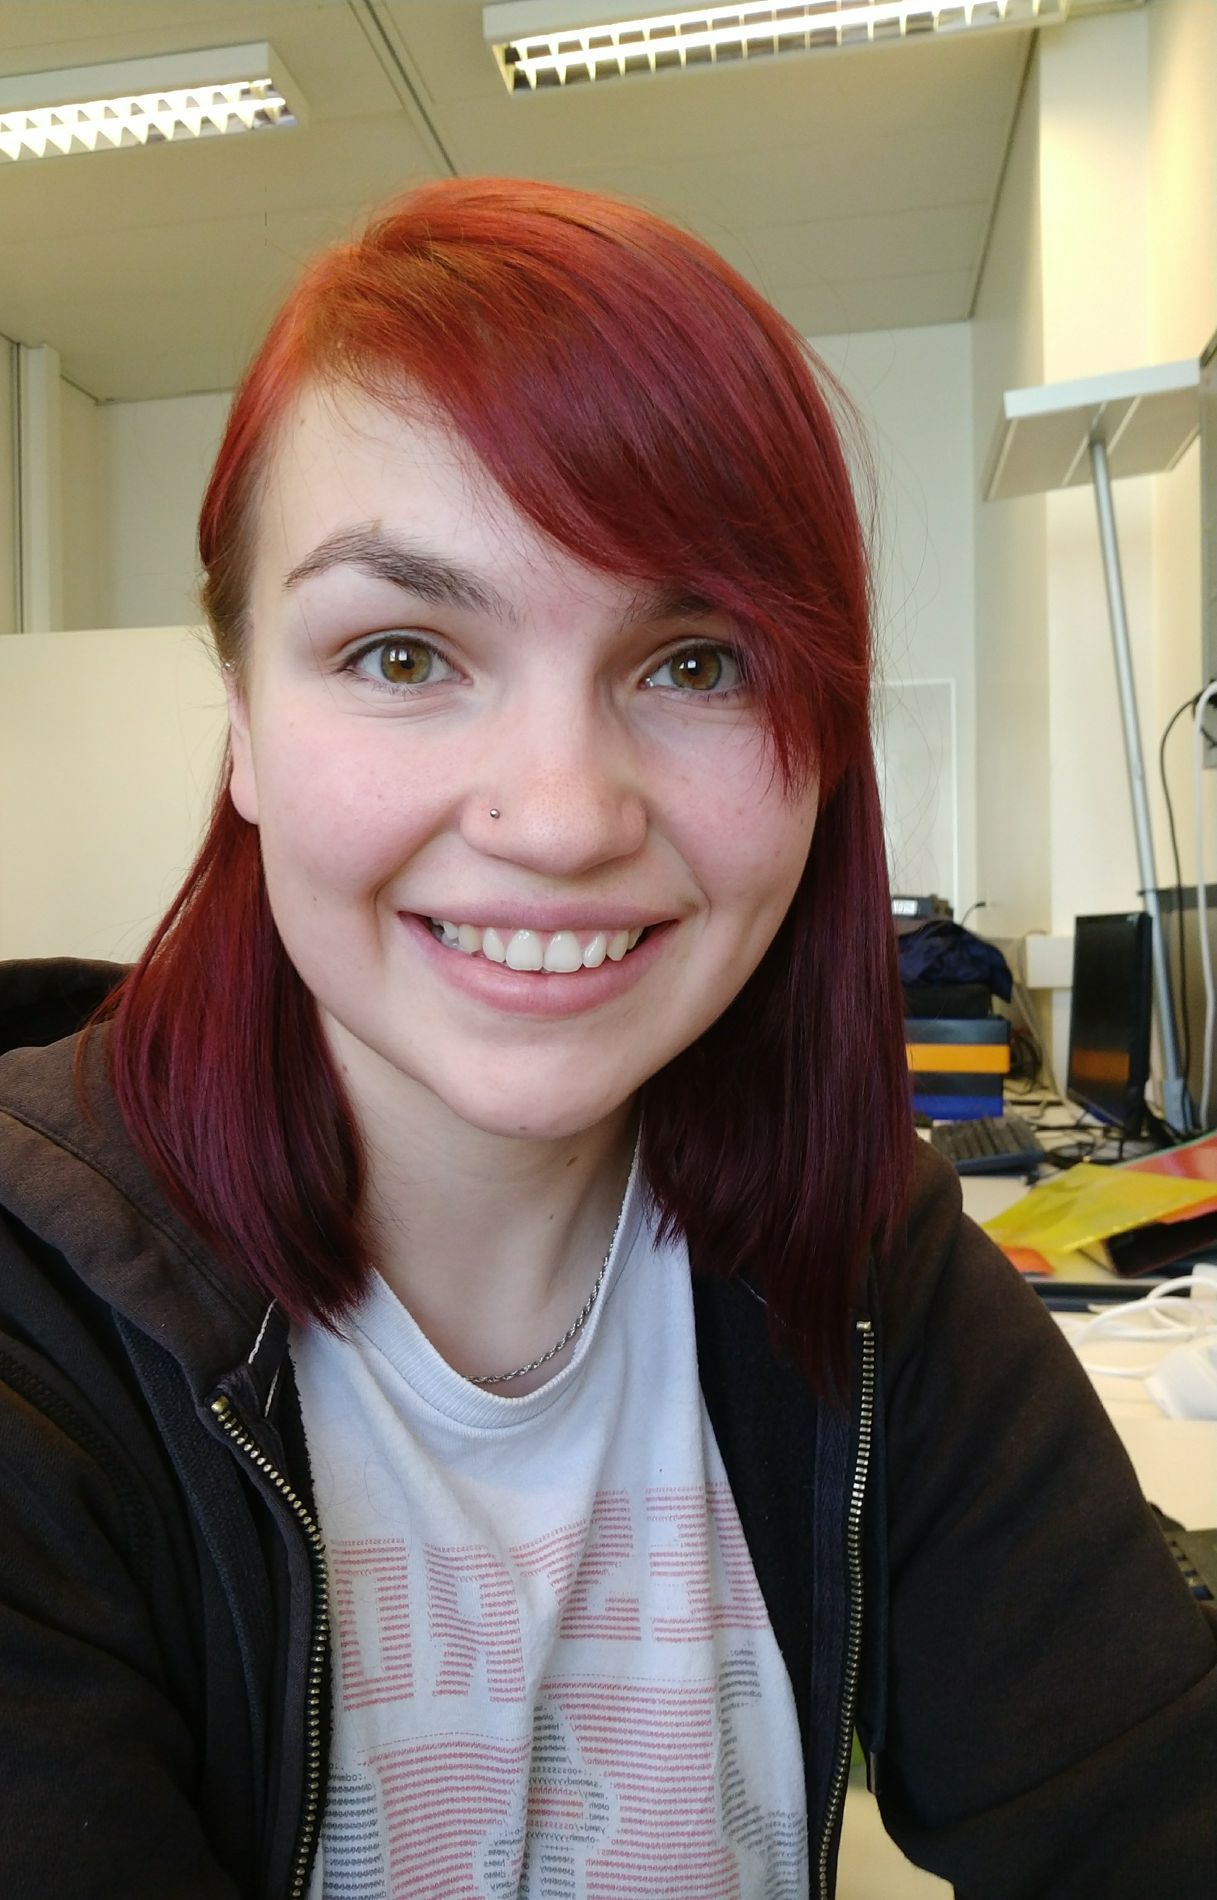 The astro particle physicist Tessa Carver (24) writes her PhD theses in the field of neutrino research at the University of Geneva.